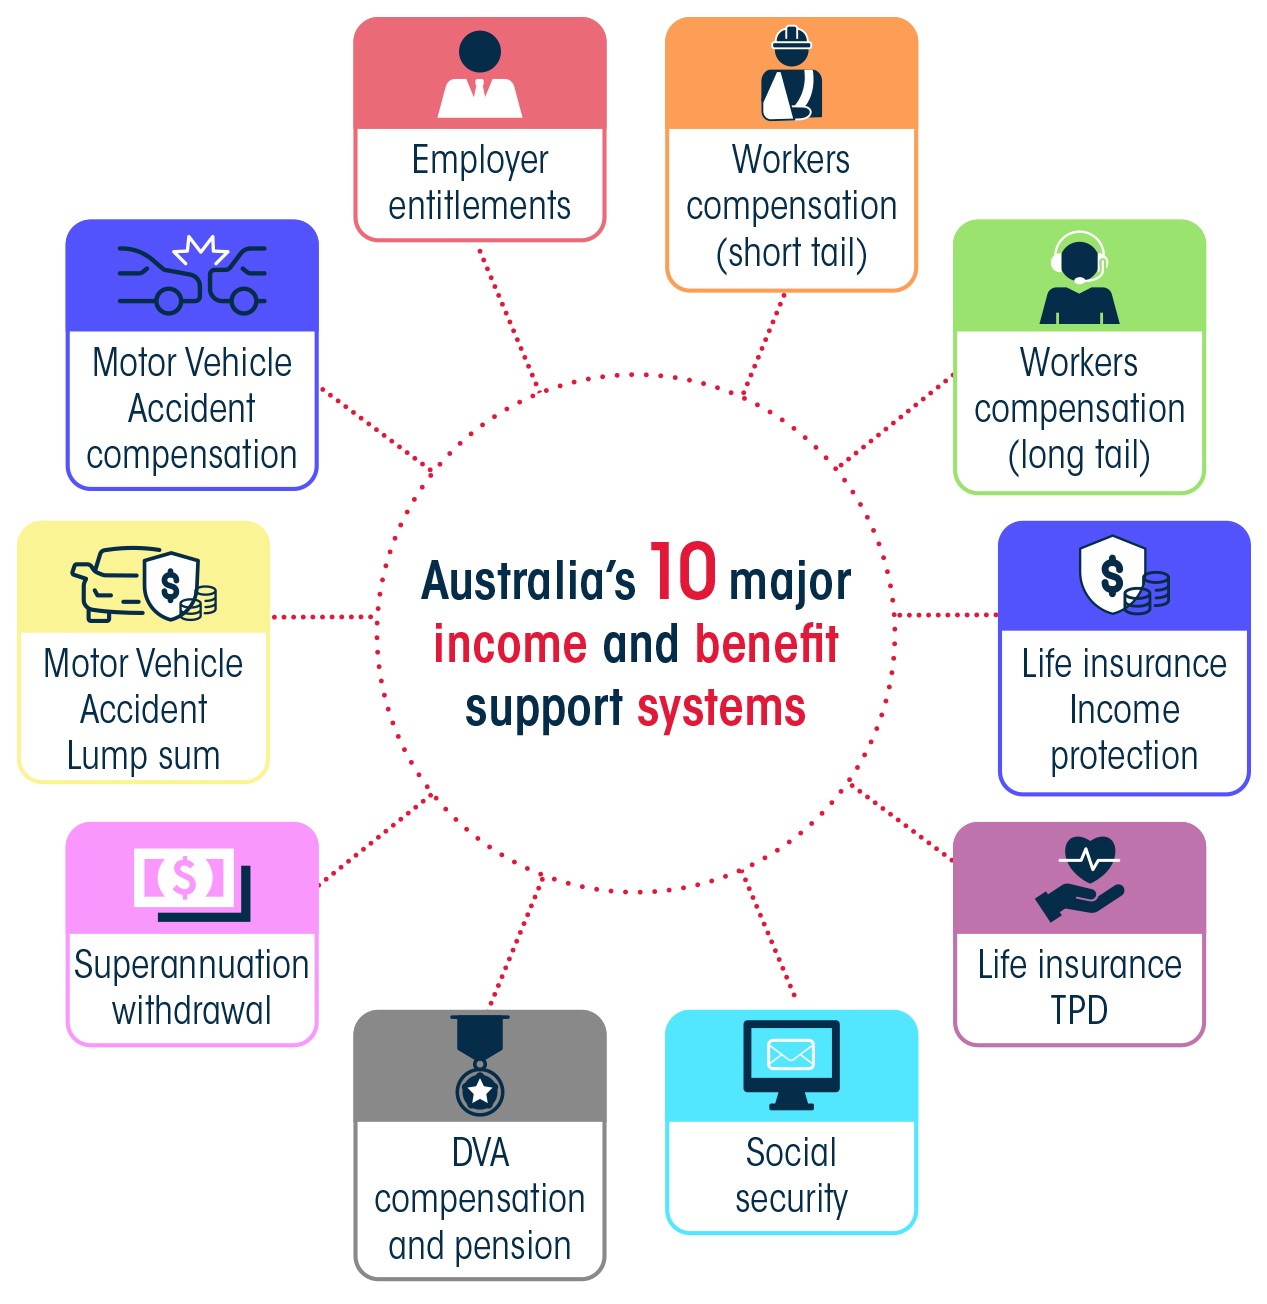 Australia's 10 major income and benefit support systems: Employer entitlements, Workers compensation (short tail), Workers compensation (long tail), Life insurance Income protection, Life insurance TPD, Social security, DVA compensation and pension, Superannuation withdrawl, Motor Vehicle Accident Lump sum, Motor Vehicle Accident compensation